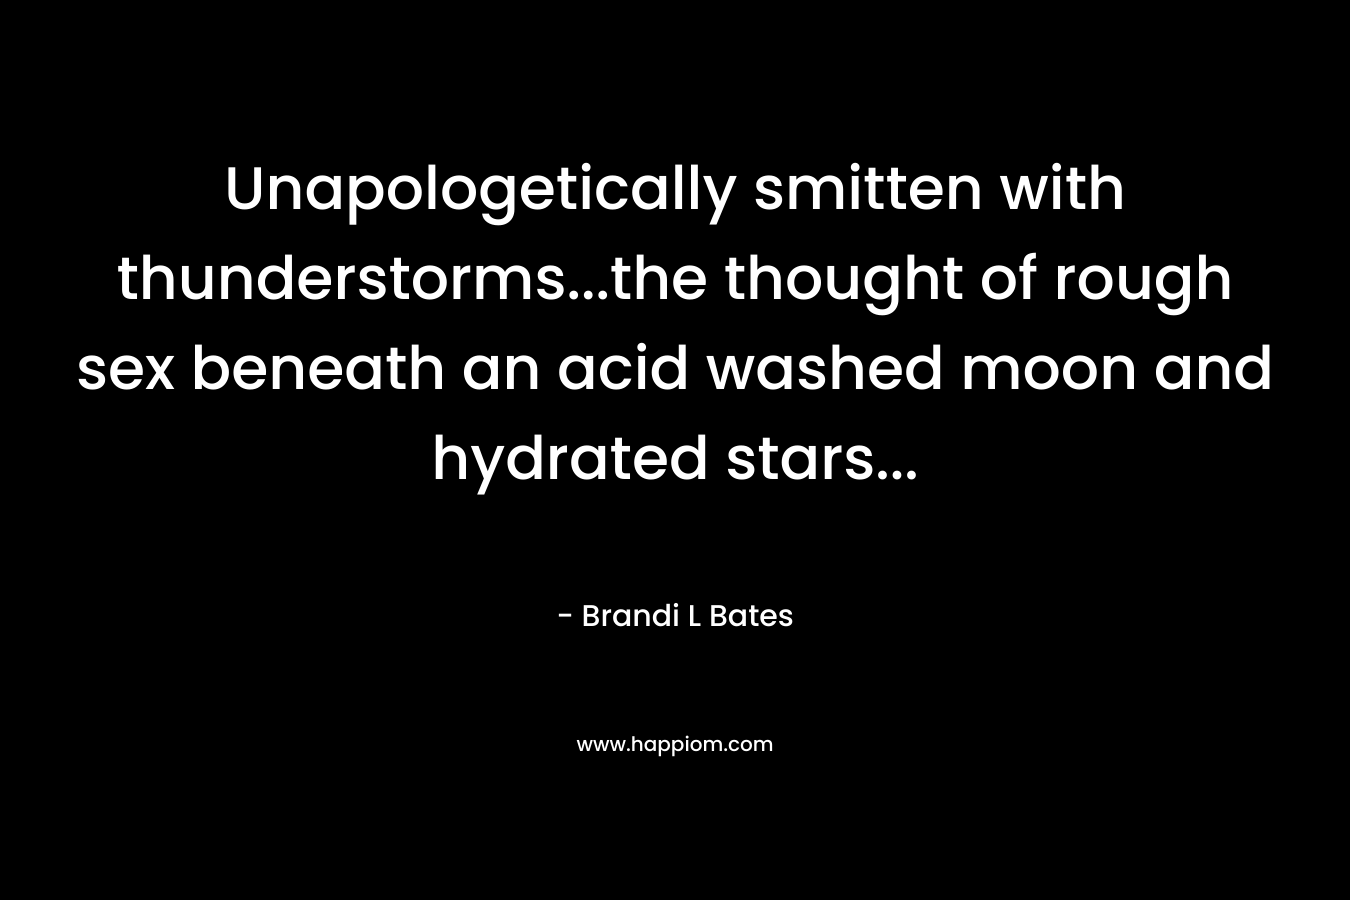 Unapologetically smitten with thunderstorms…the thought of rough sex beneath an acid washed moon and hydrated stars… – Brandi L Bates